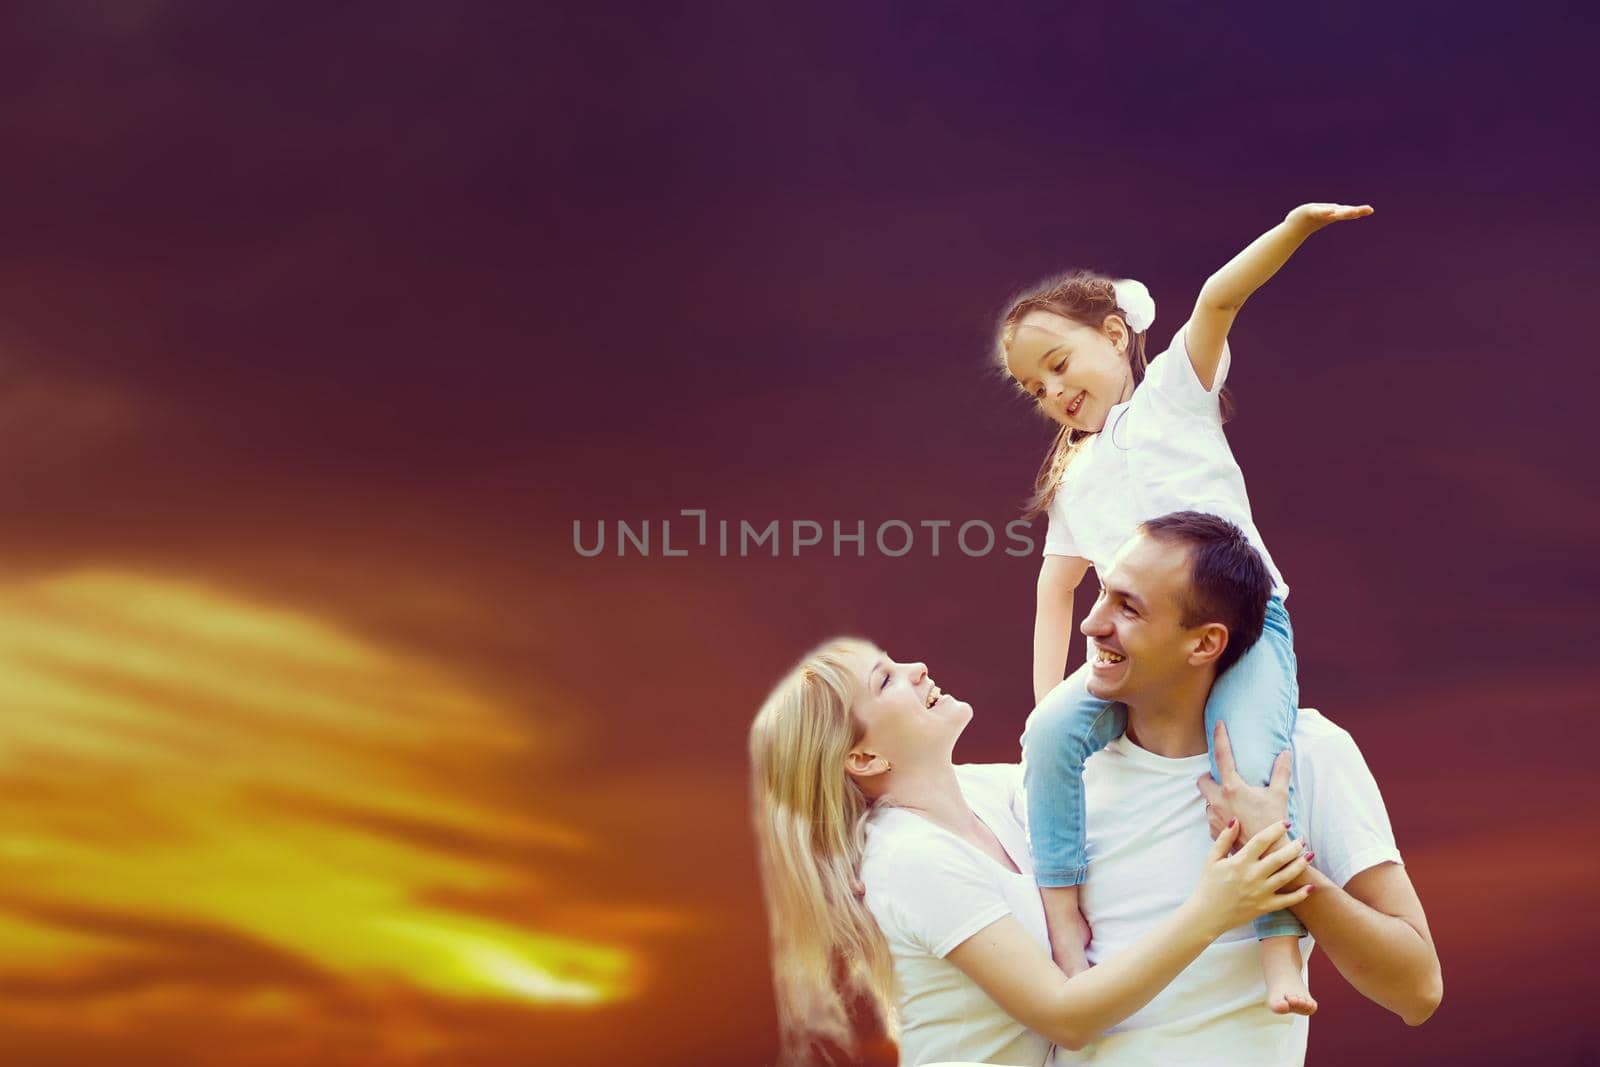 young happy family having fun outdoors, dressed in white and on sky and sunset